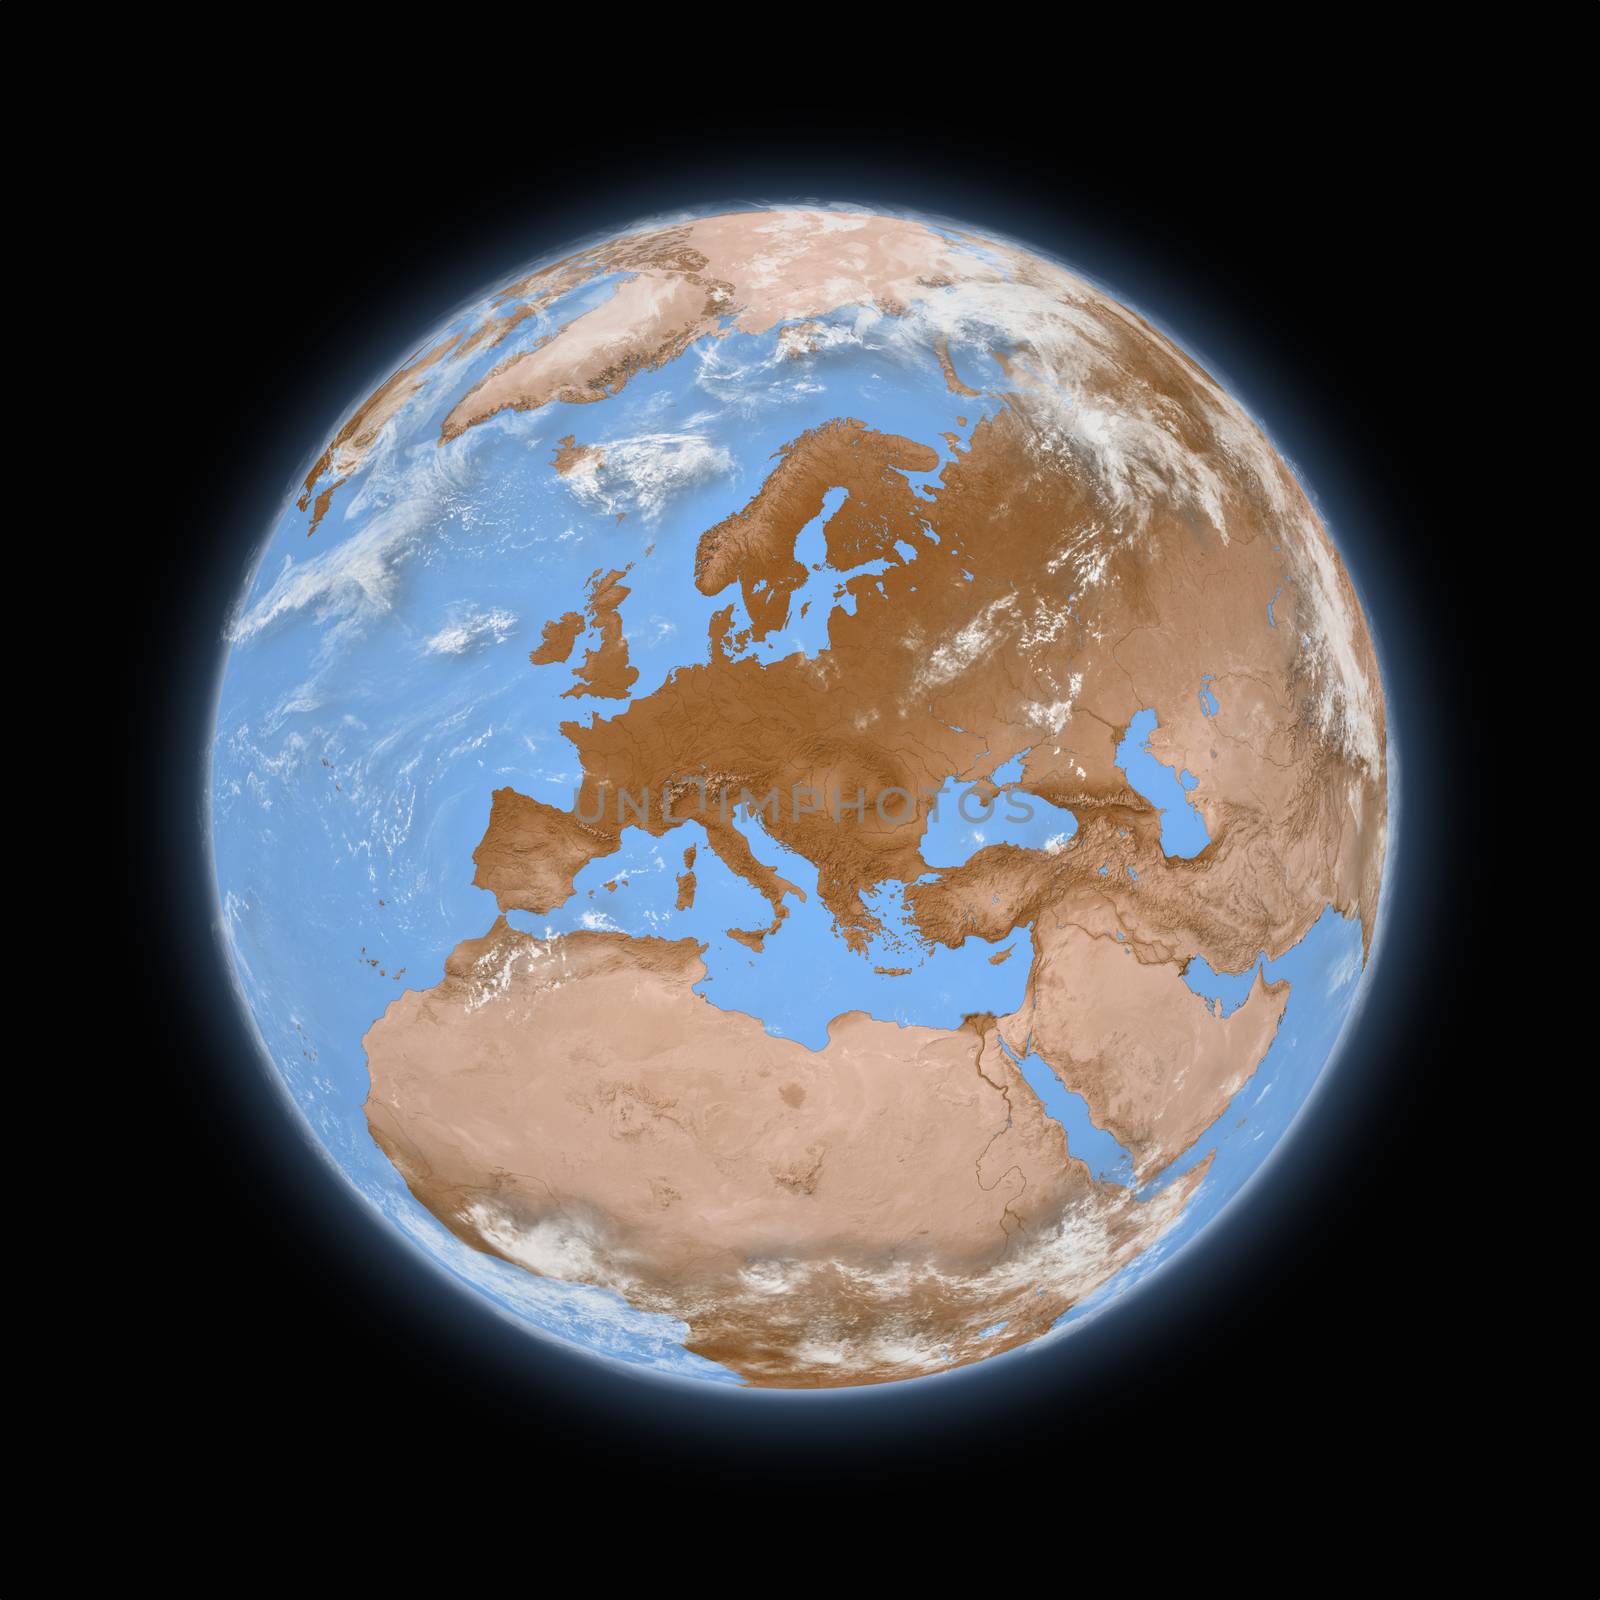 Europe on planet Earth by Harvepino